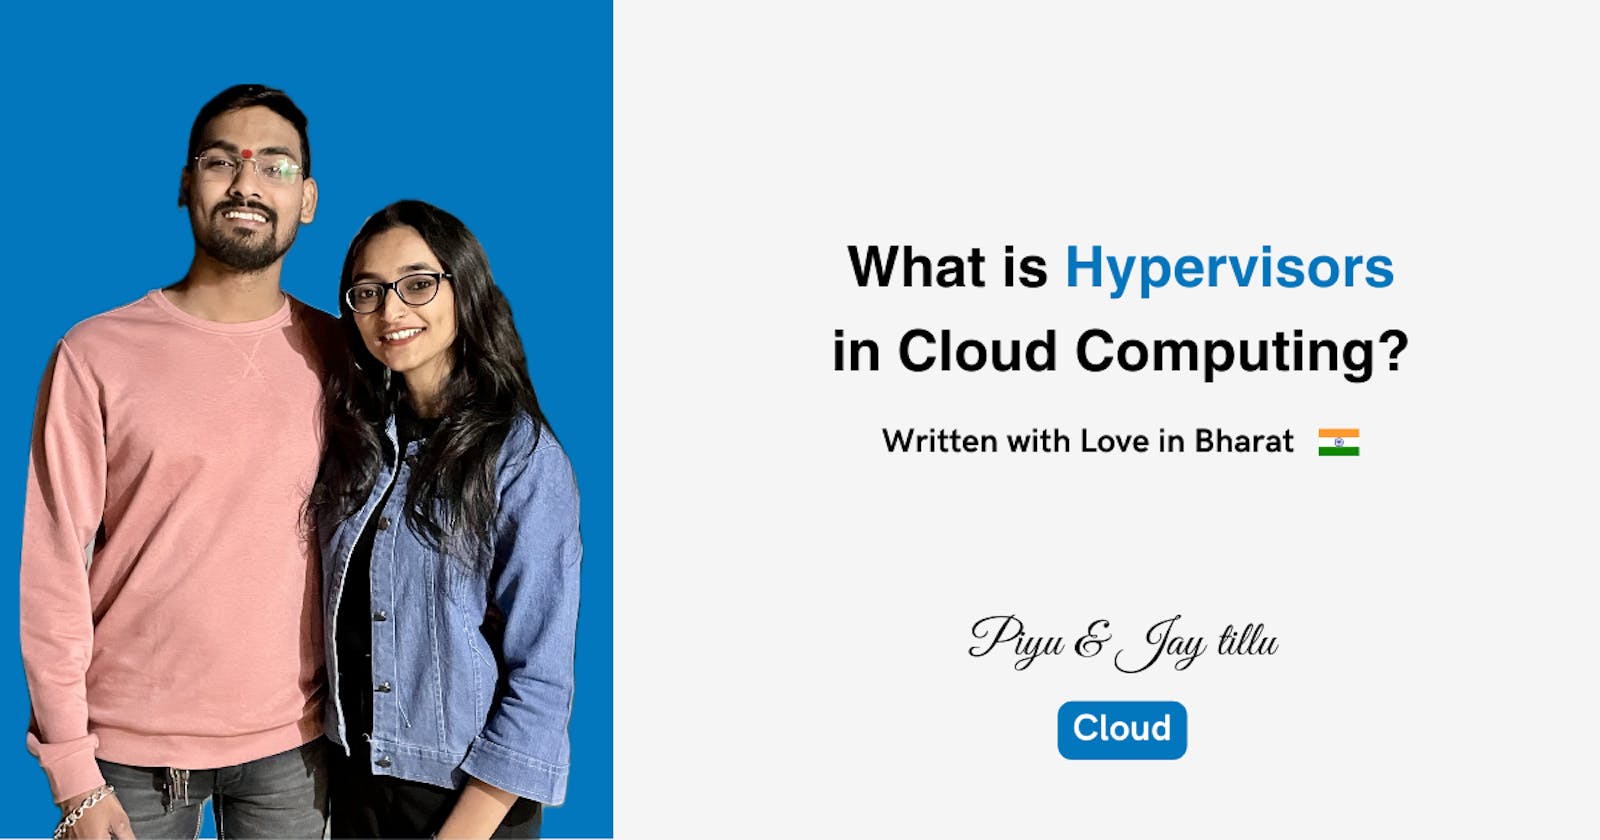 What is Hypervisors in Cloud Computing?